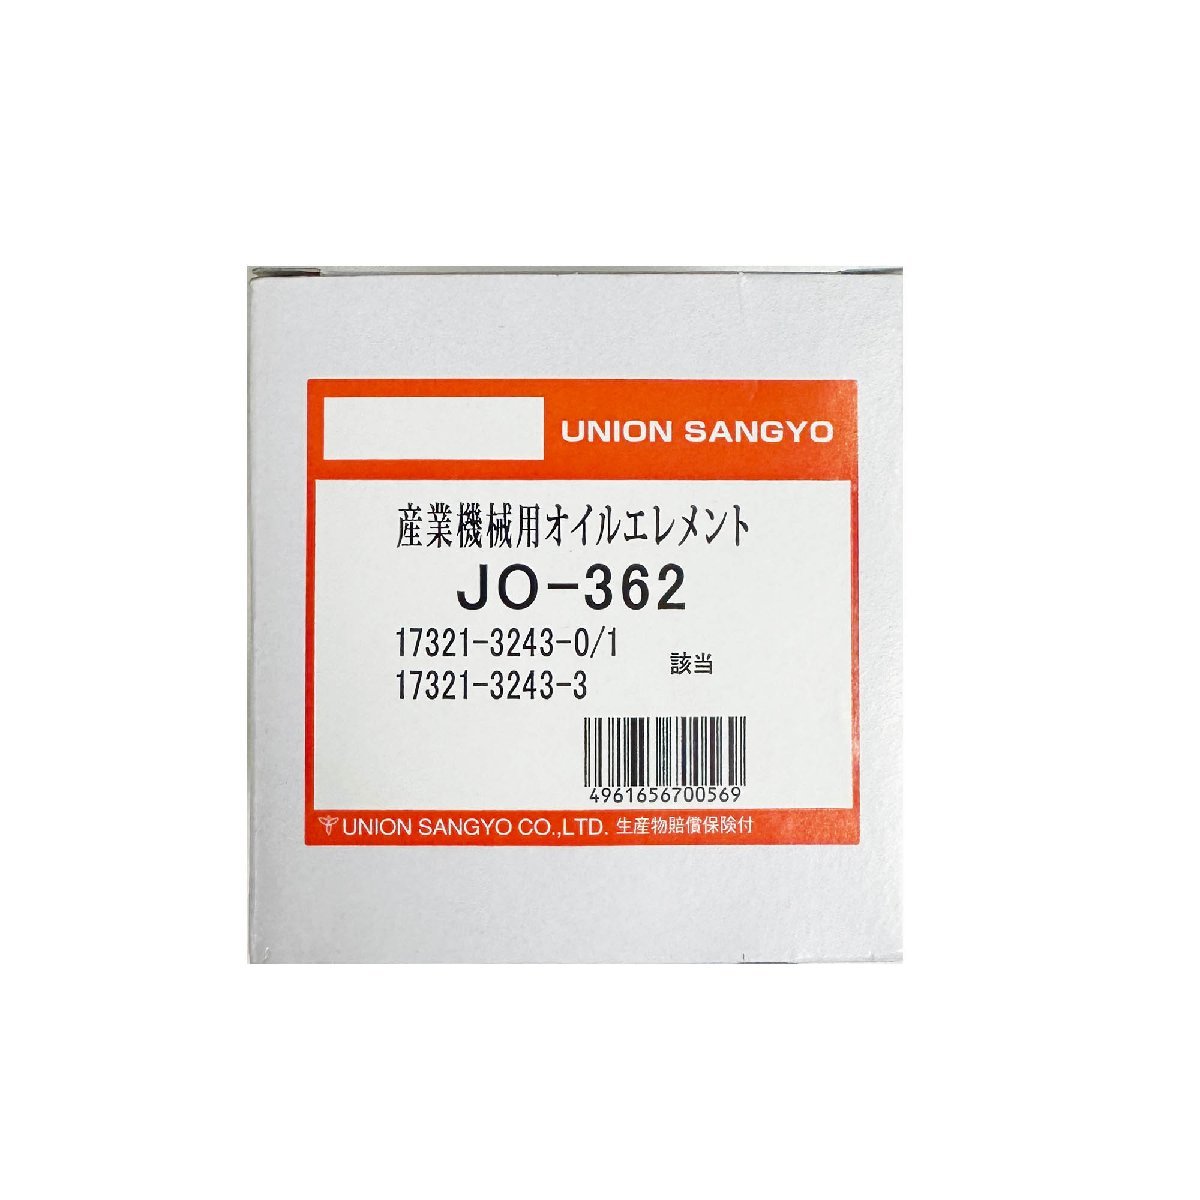 JO-362 TCM Bobcat 533 543 606. one part Union made product number necessary verification oil element oil filter industrial machinery for 